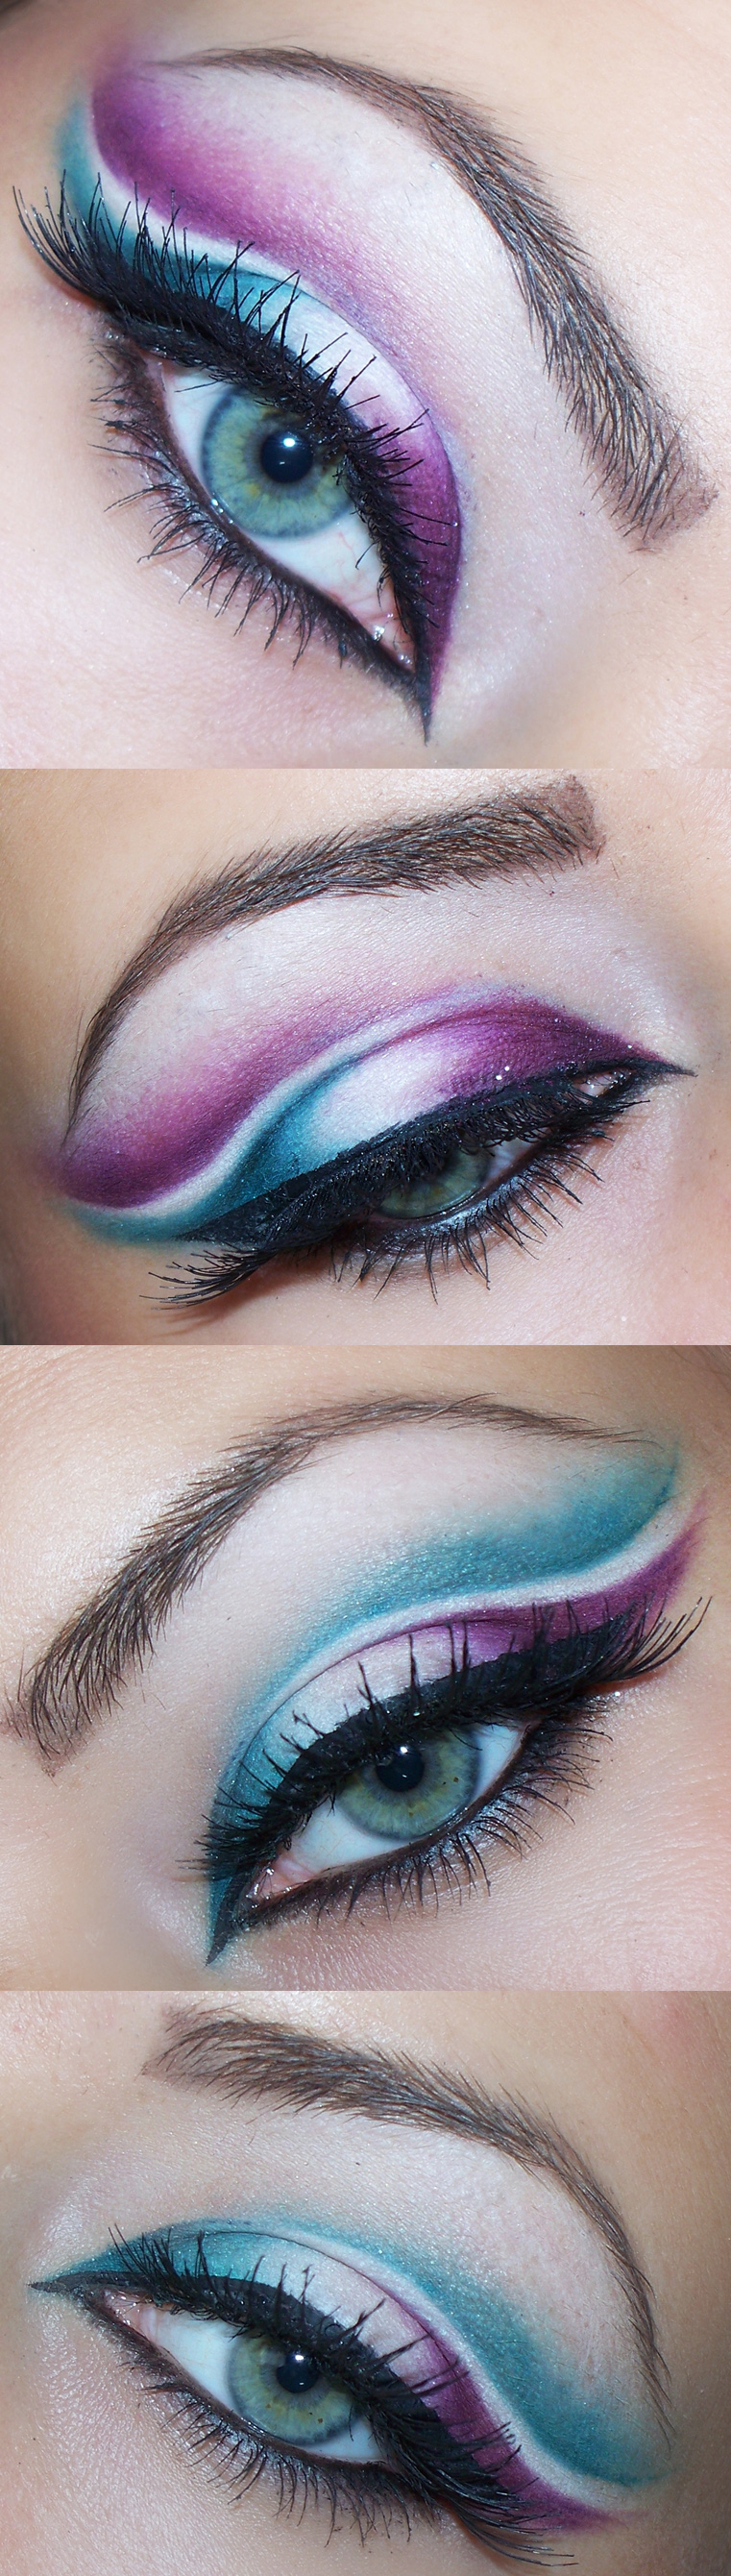 Best Eye Makeup Ideas for Blue Eyes: Purple and Blue